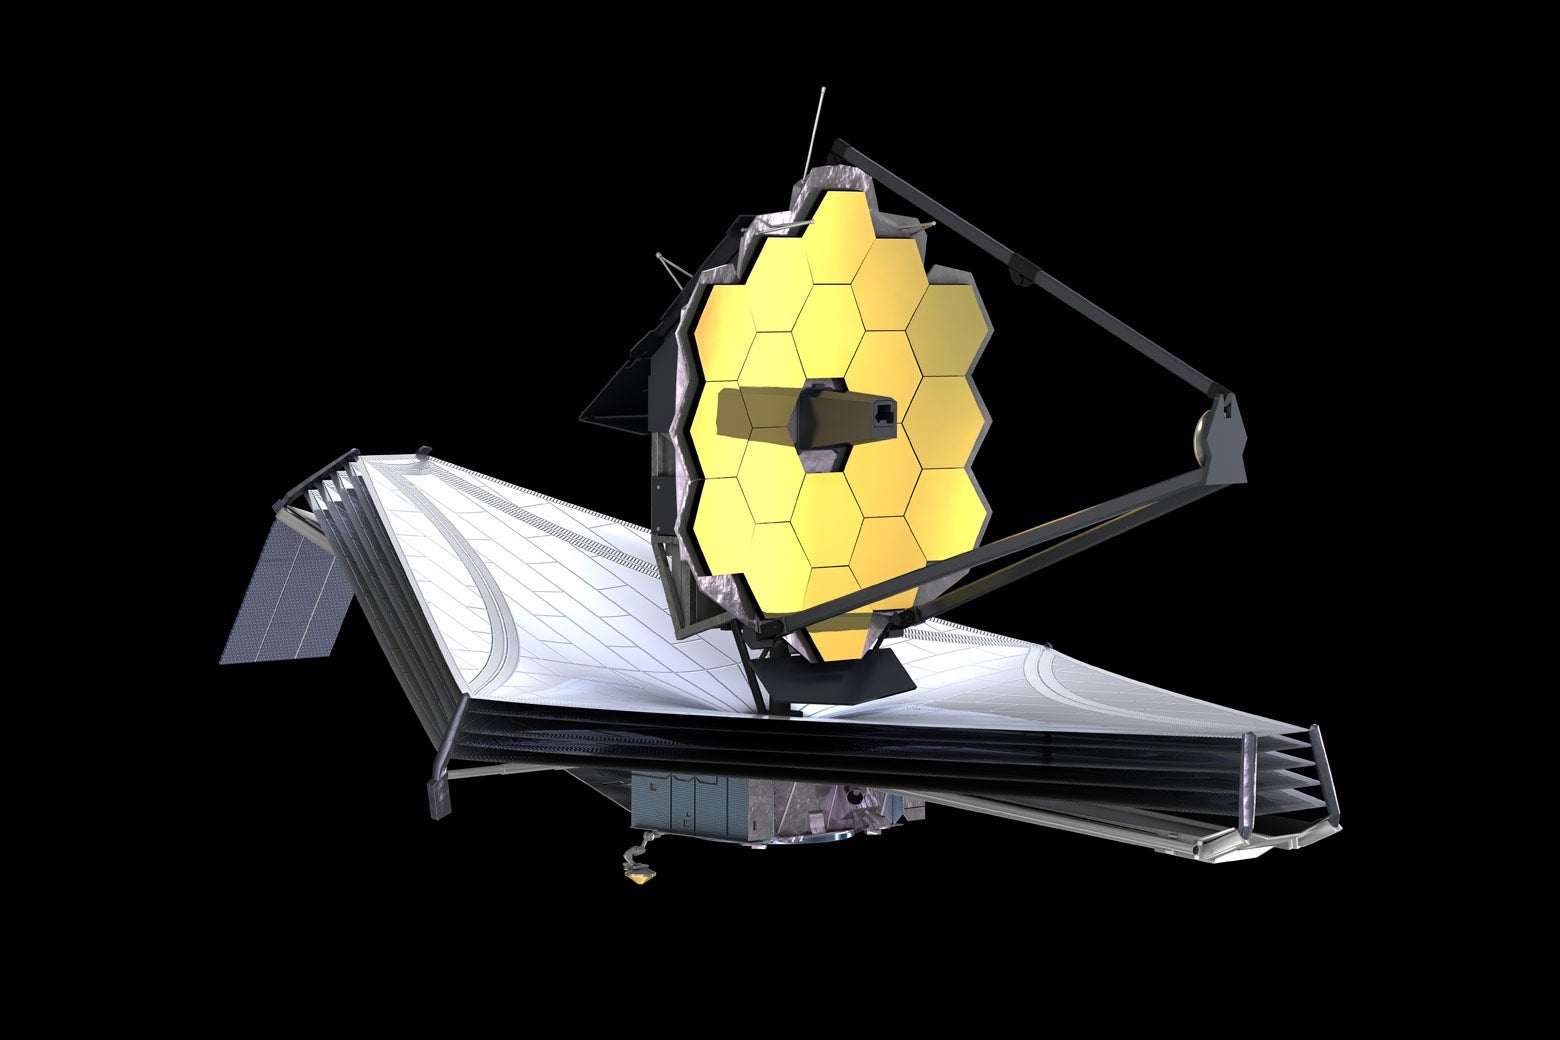 An illustration of the James Webb Space Telescope.